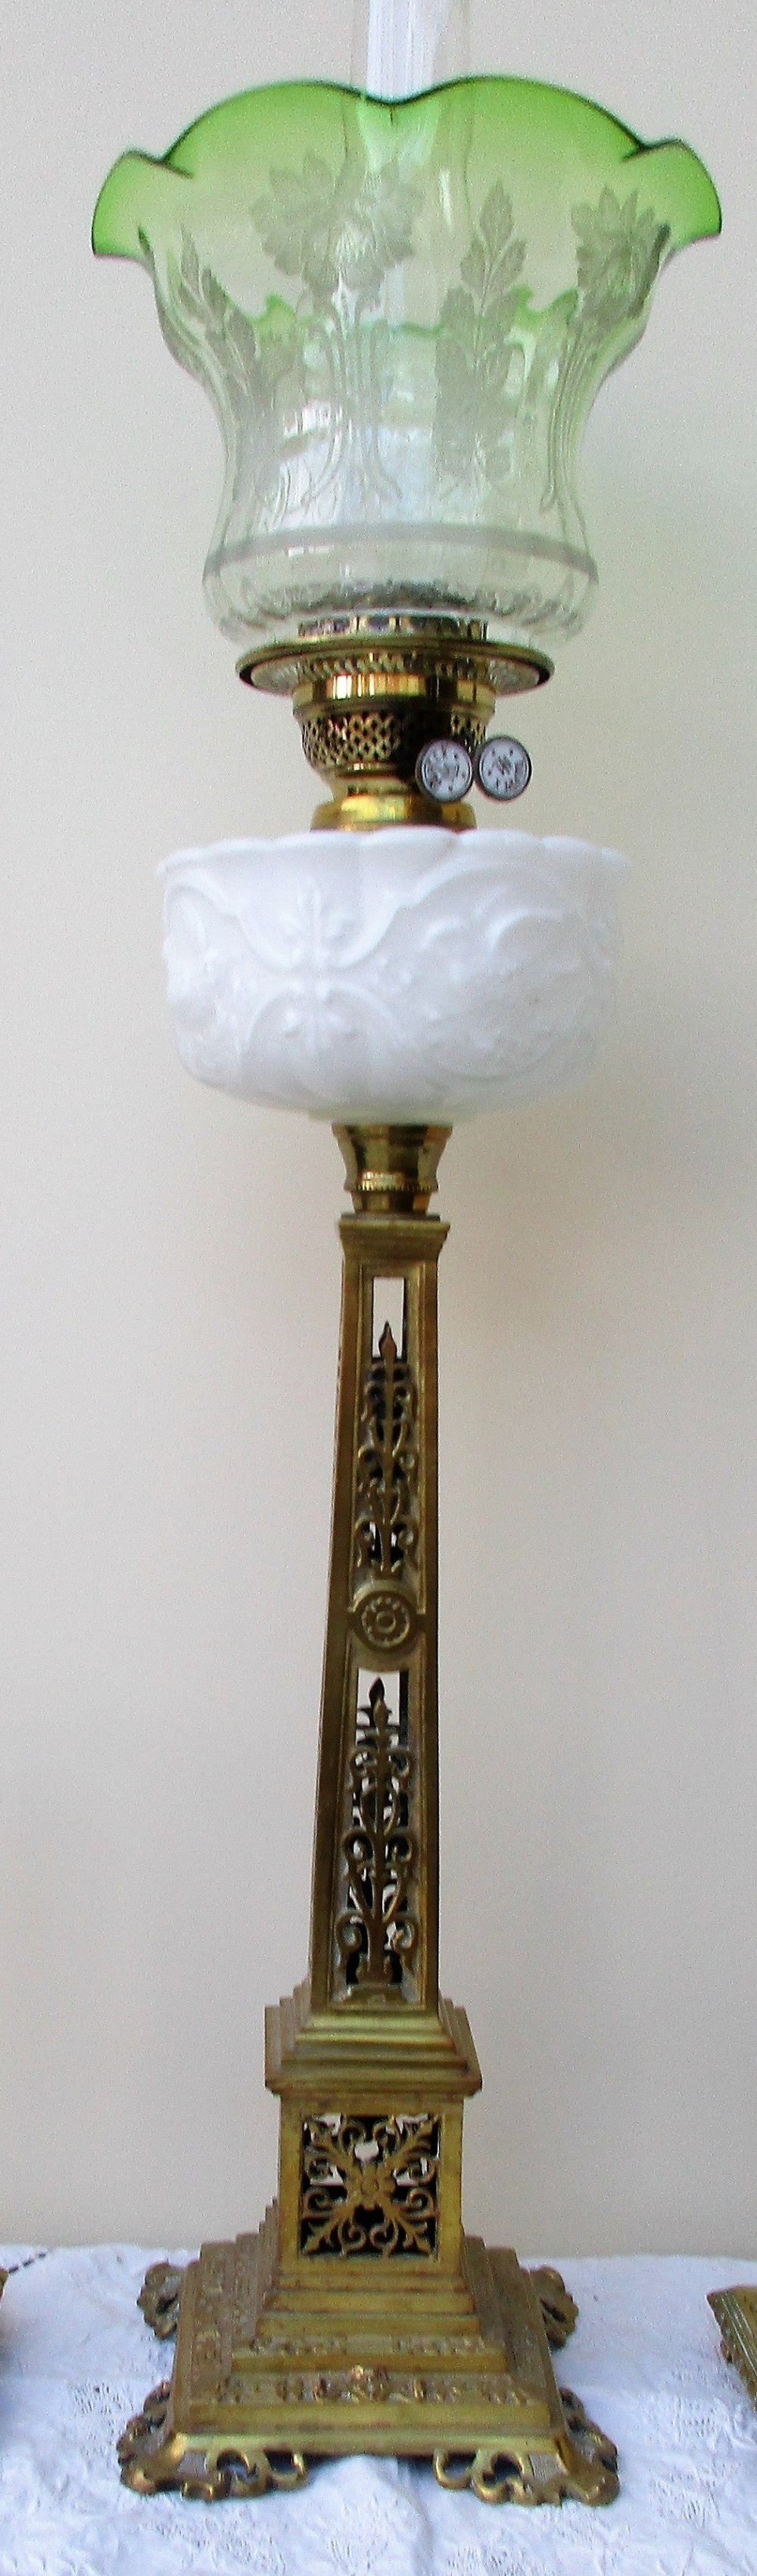 antique anglo french belle poque cast brass column oil lamp